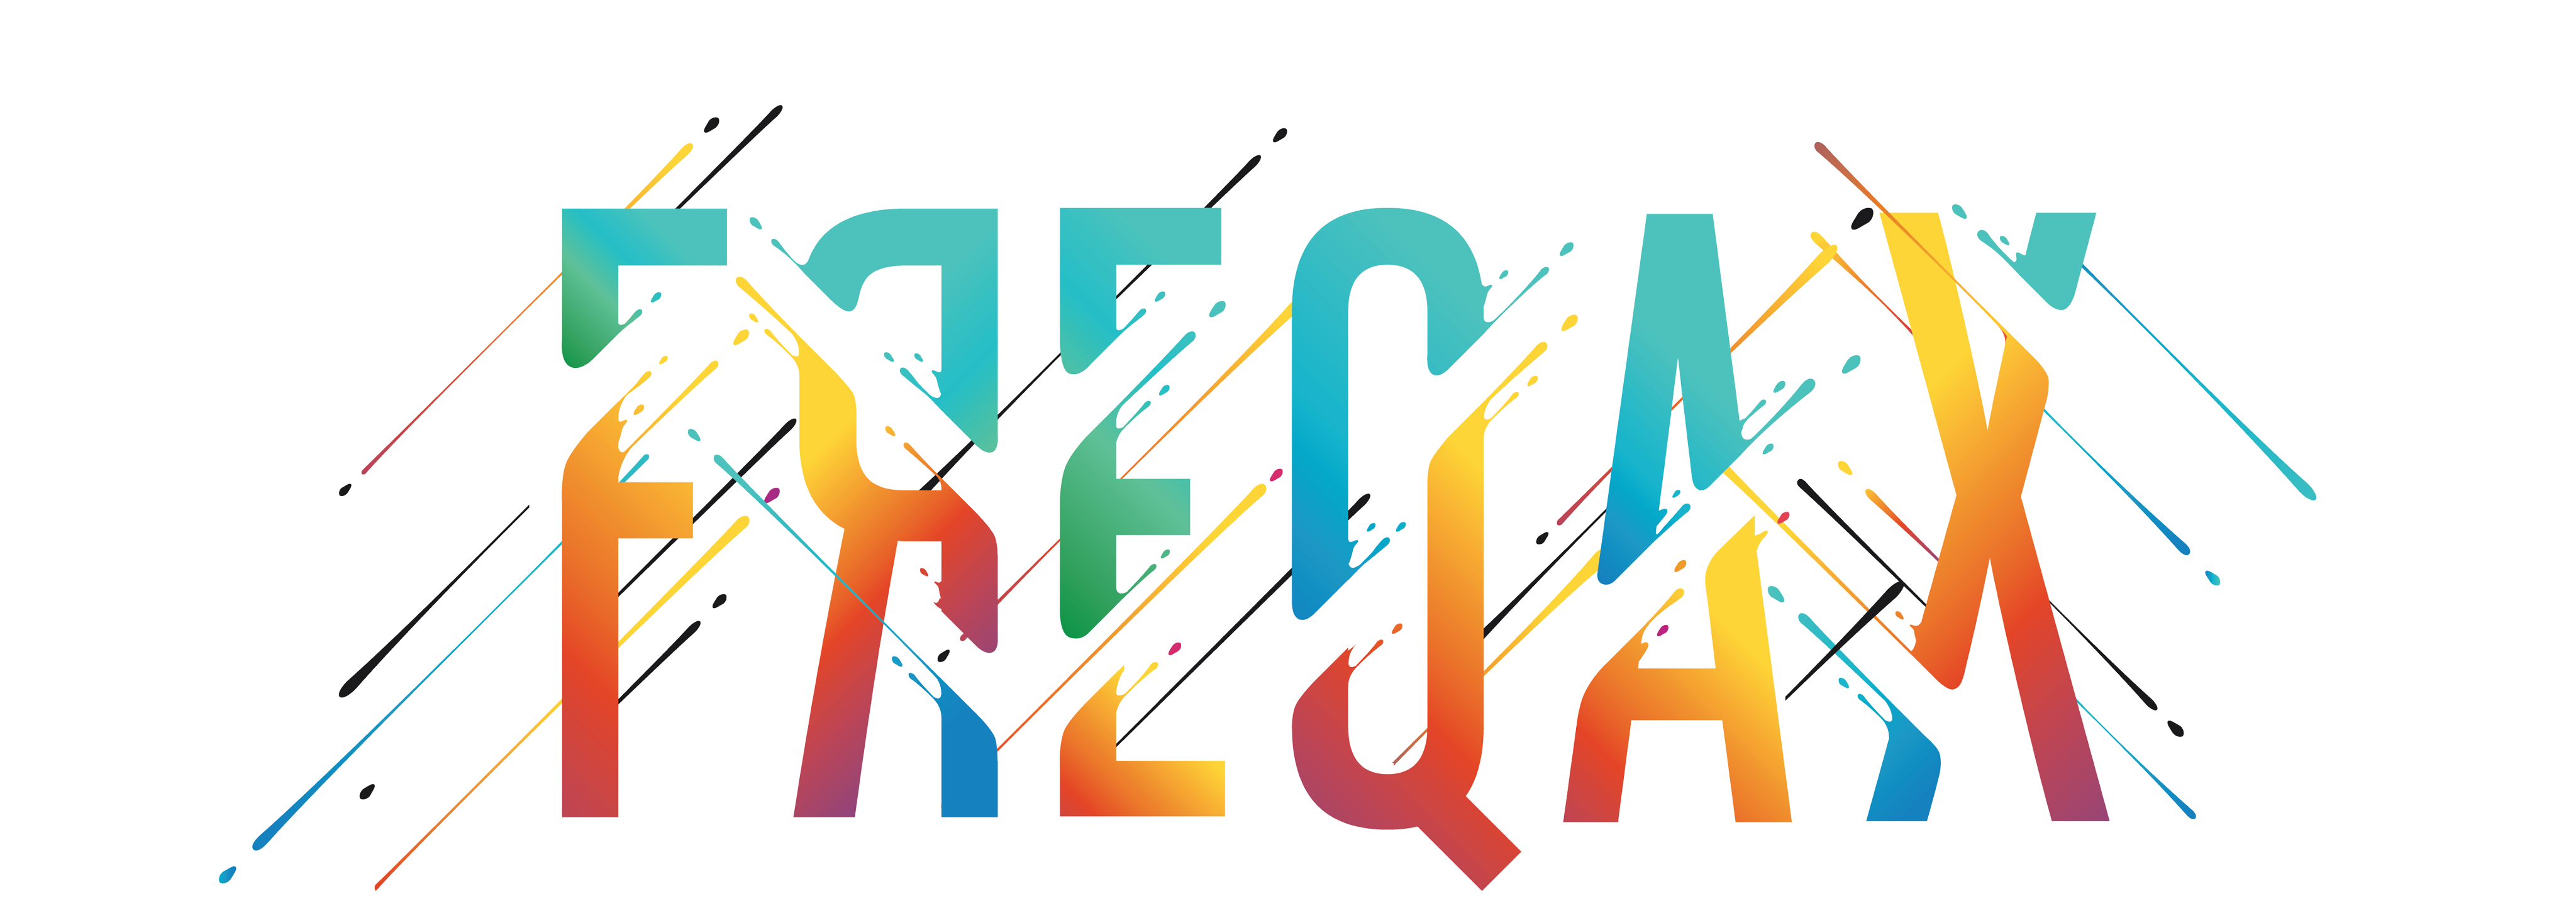 FREQAX of FREQKID - OFFICIAL